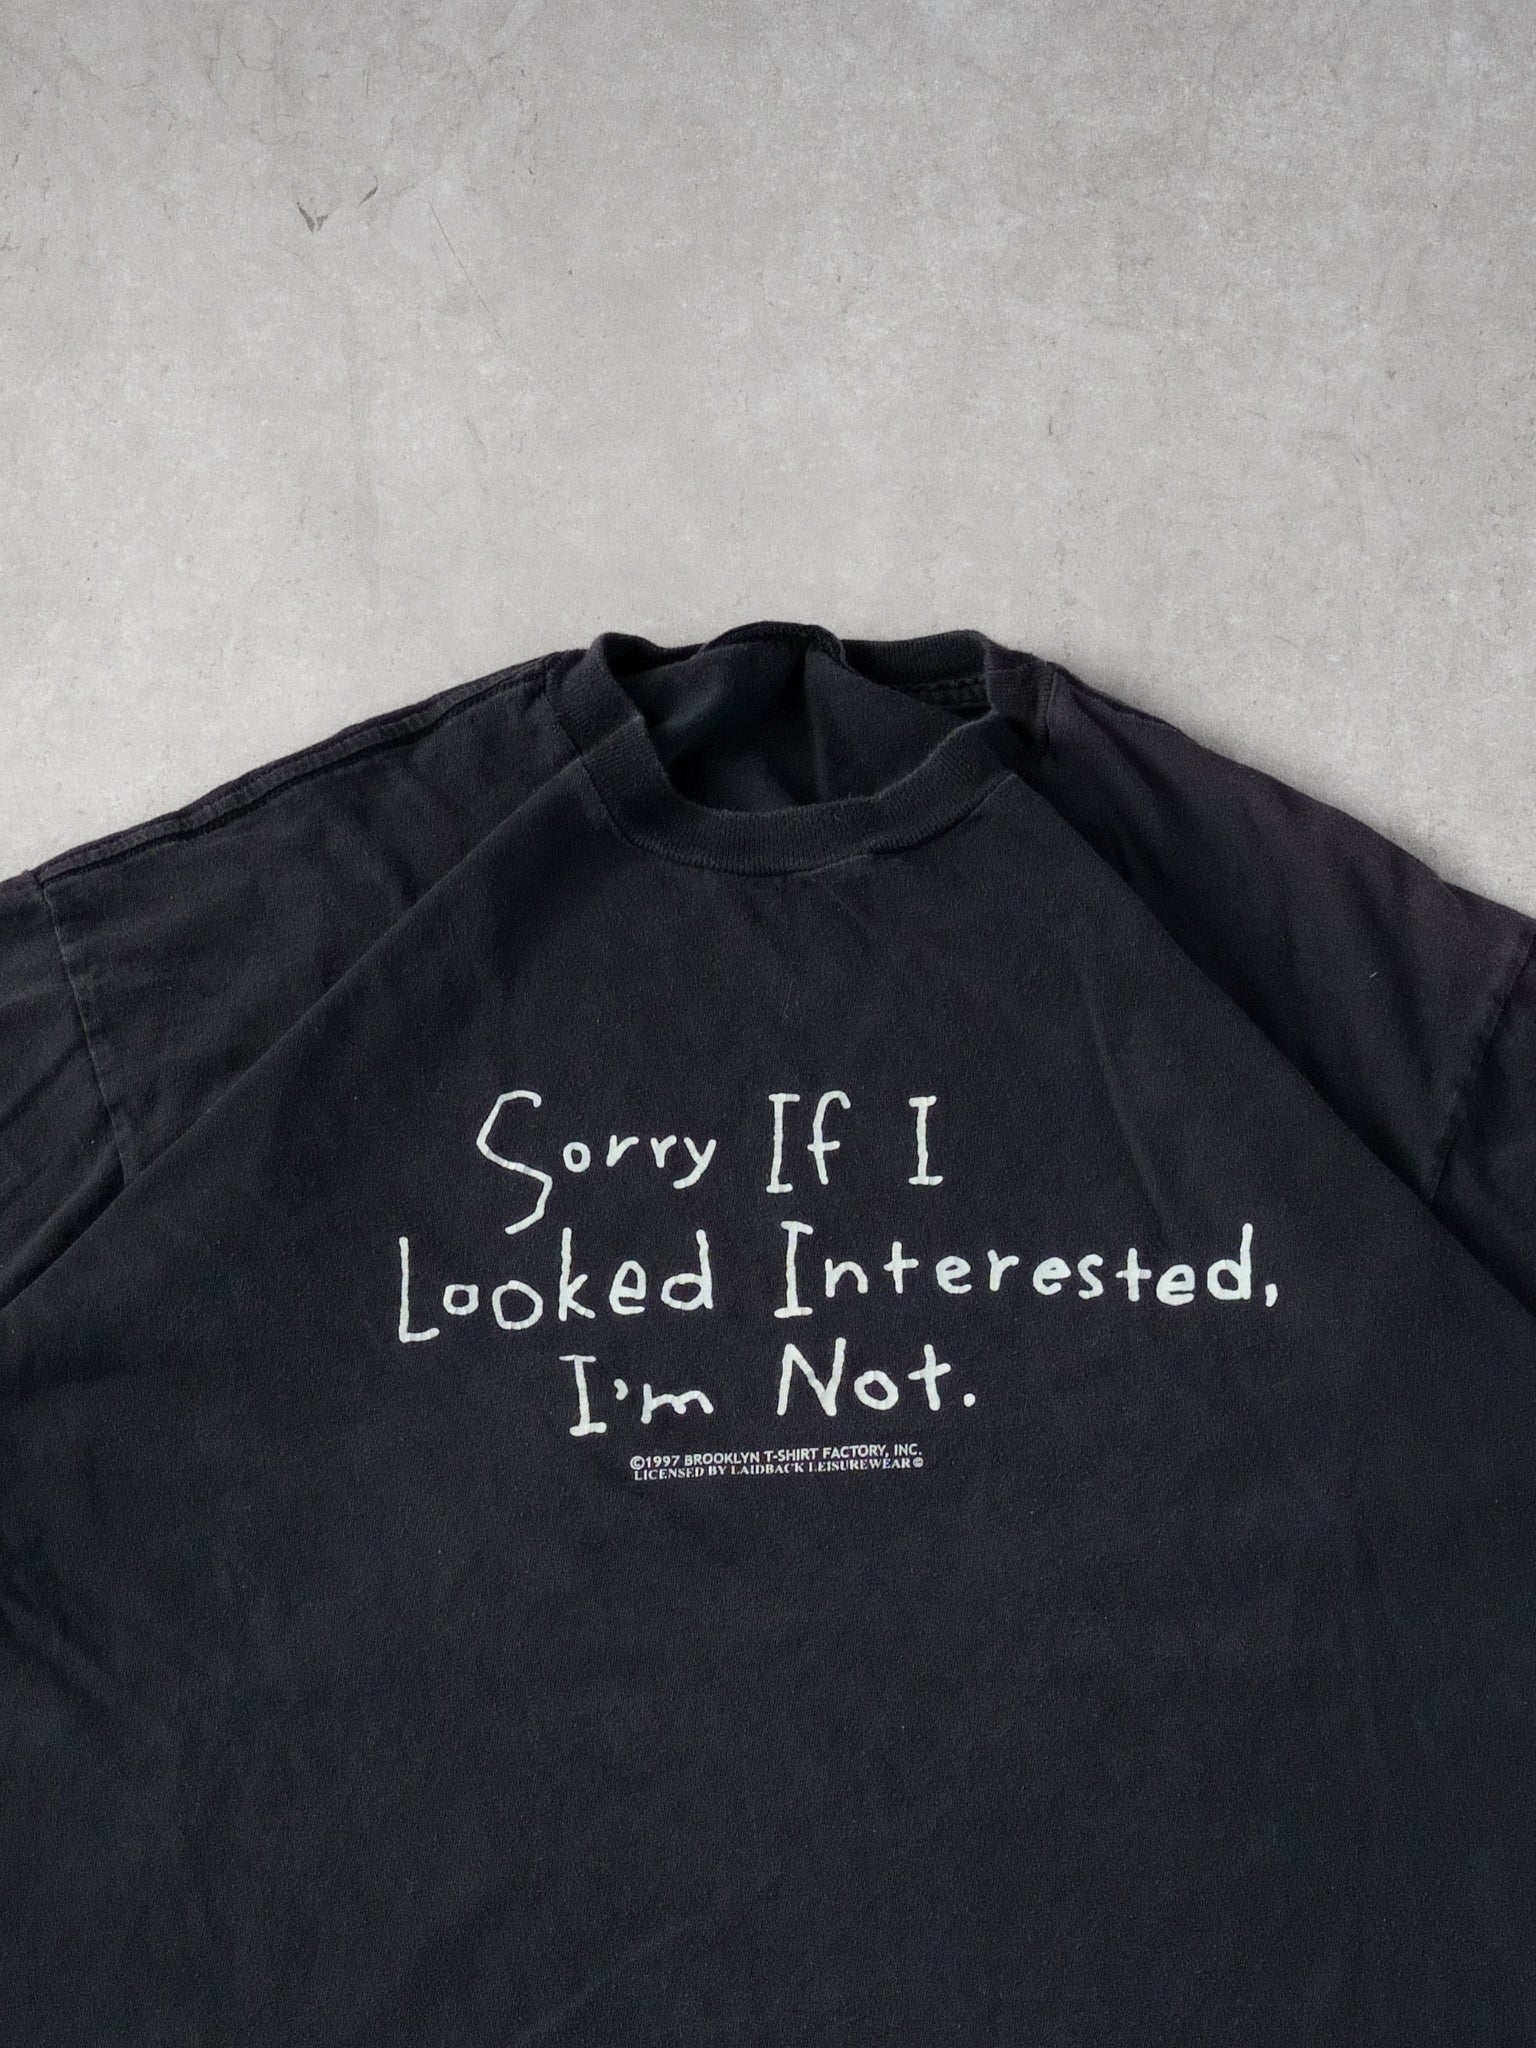 Vintage 97' Washed Black "Sorry if I Looked Internested I'm Not" Tee (L)